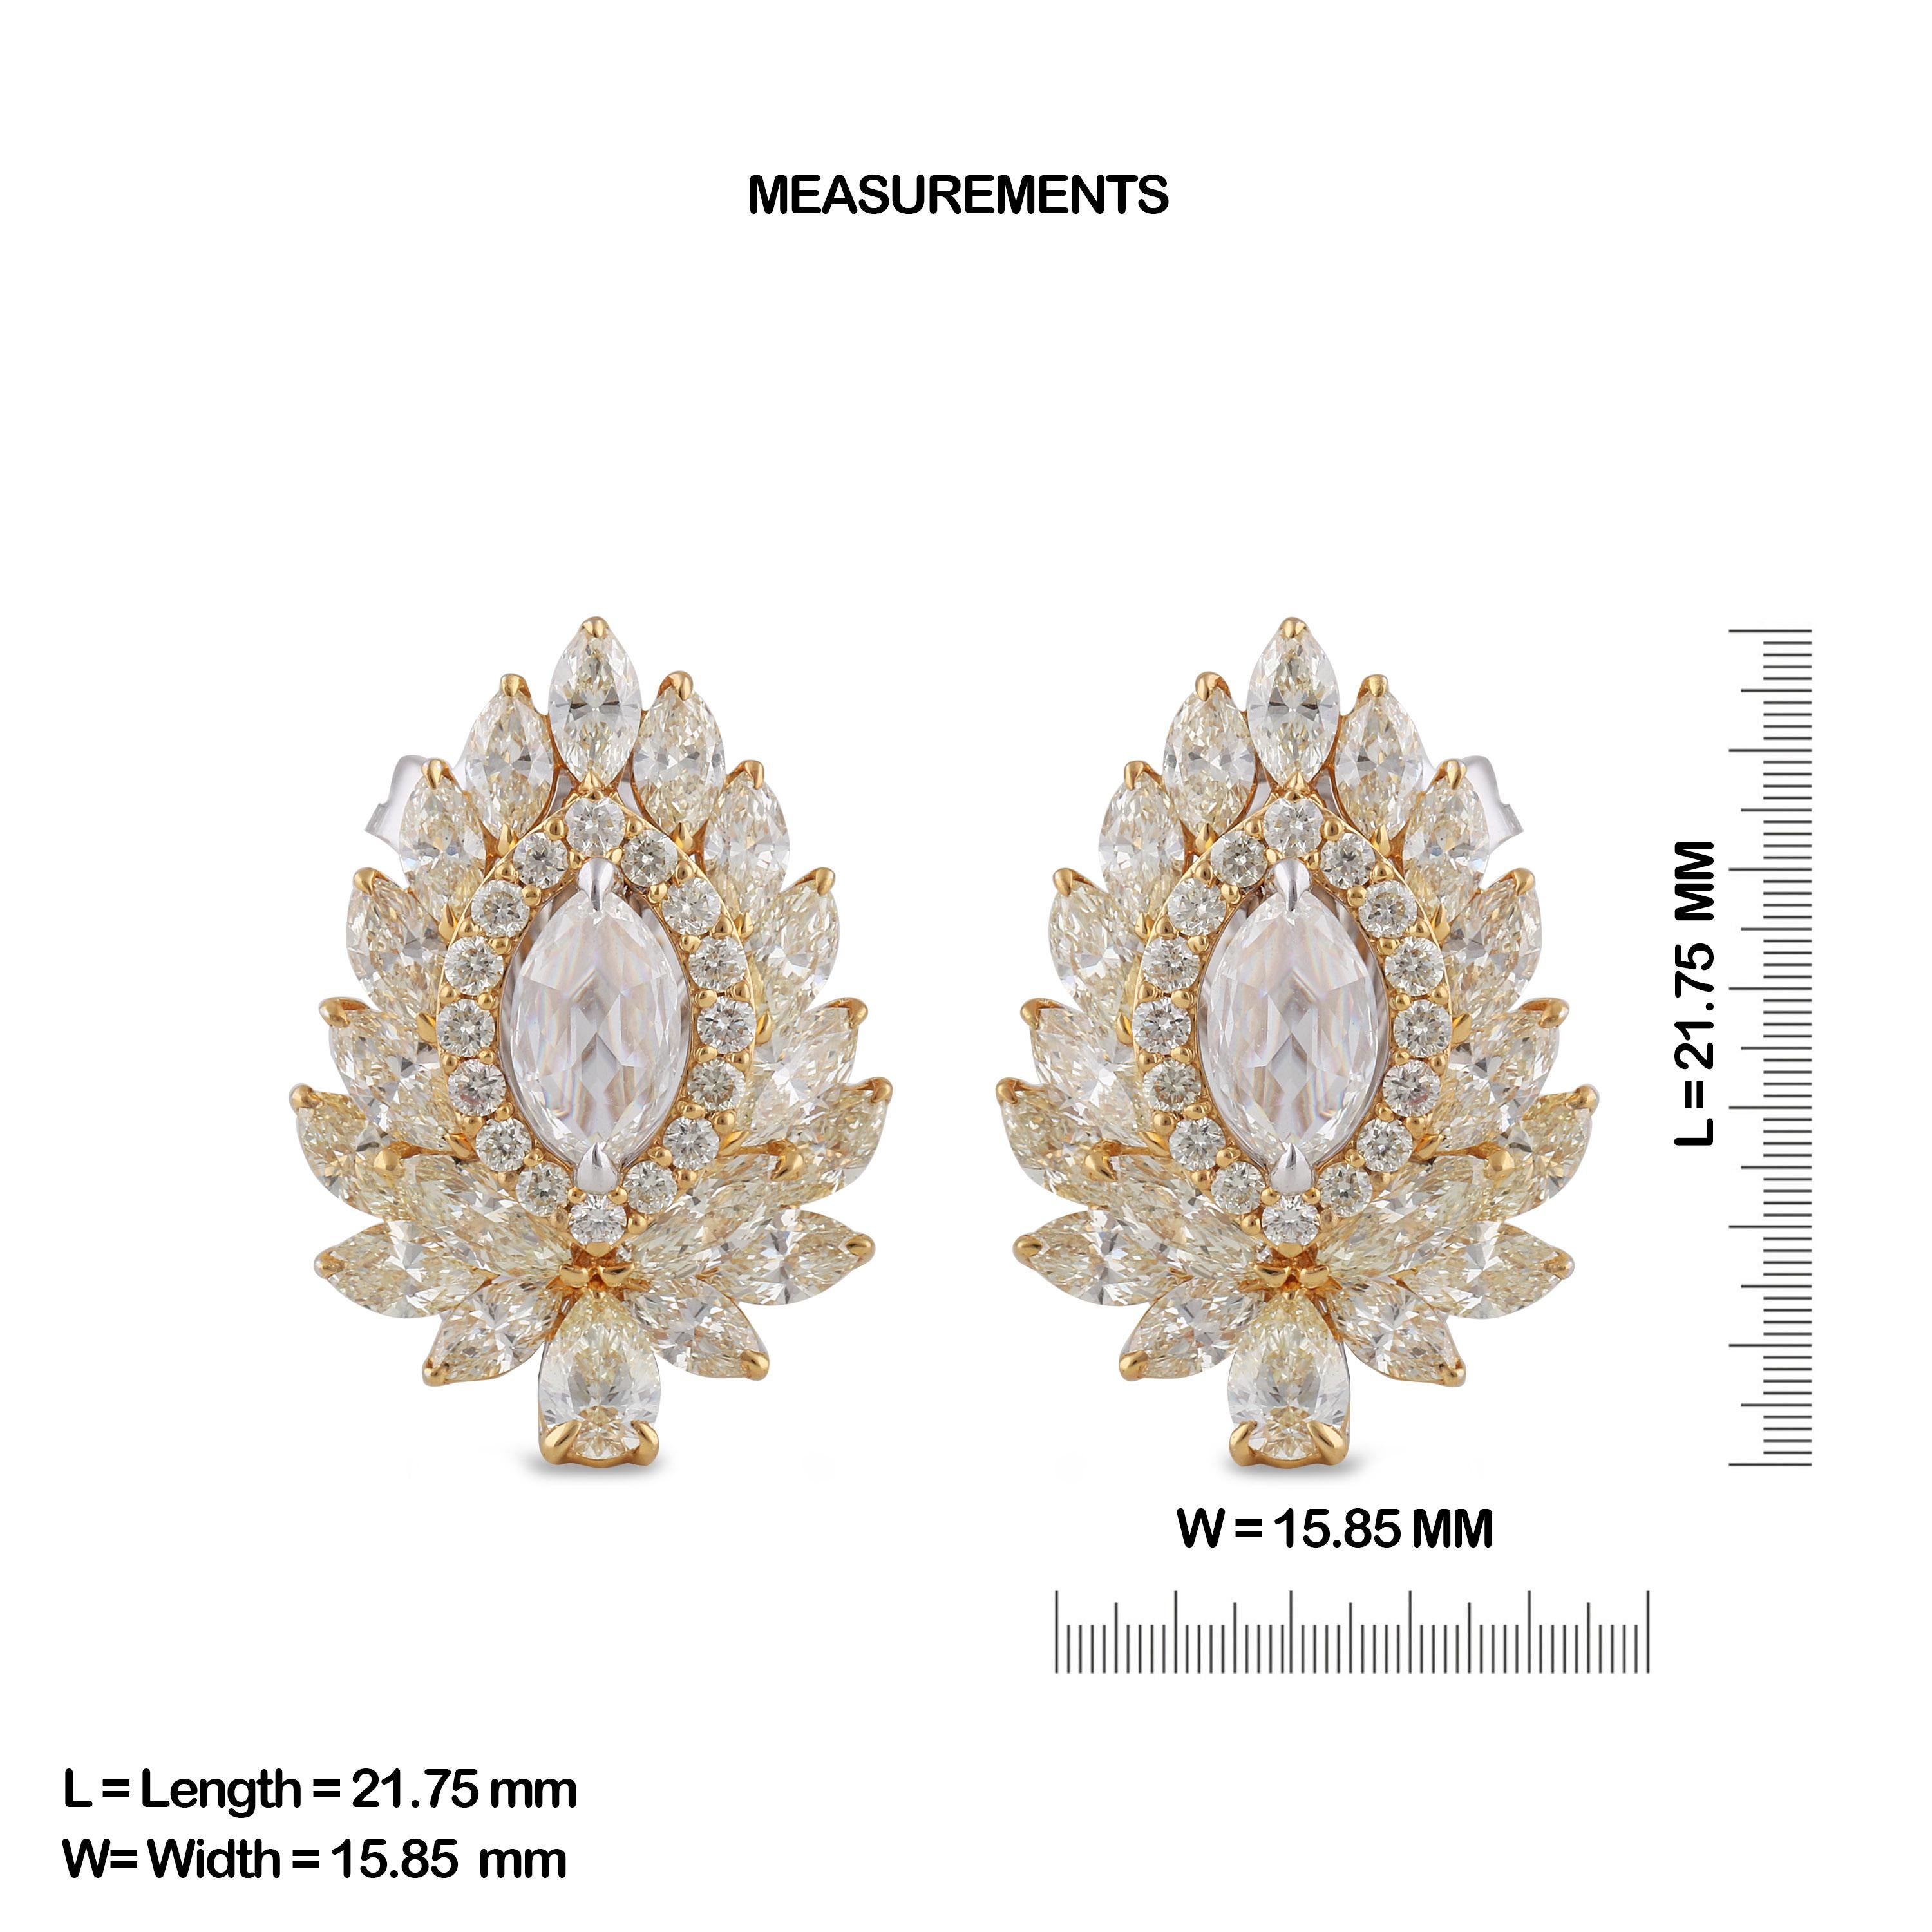 Gross Weight: 10.85 Grams
Diamond Weight: 4.96 cts
IGI Certification can be done on request.

Video of the product can be shared on request

These studs are studded with yellow full cut marquise and pear diamonds and white marquise rose cut diamonds